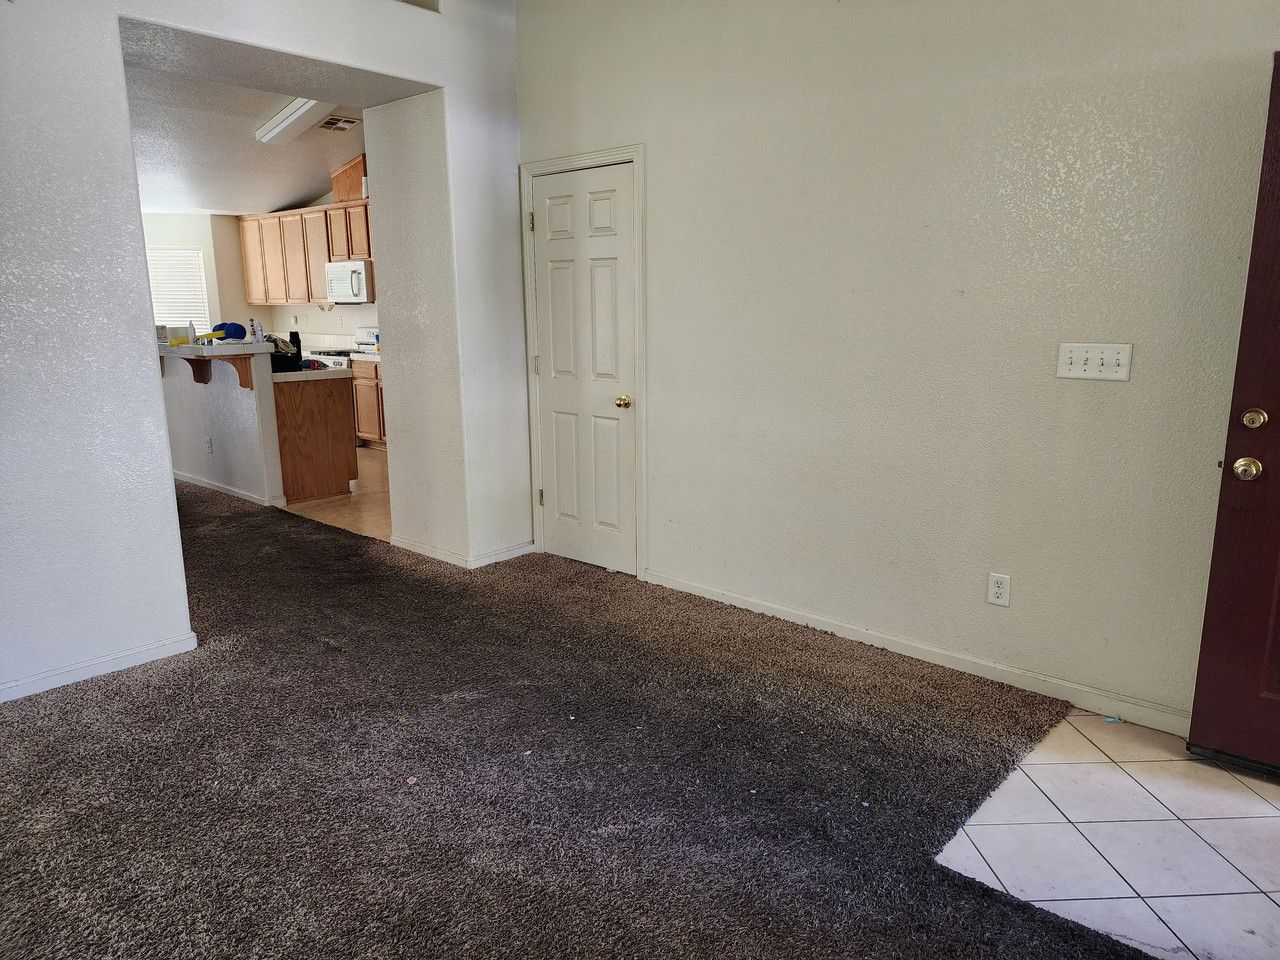 Completely empty living room, devoid of furniture or decorations, displaying a clean and open space ready for new design or occupancy.